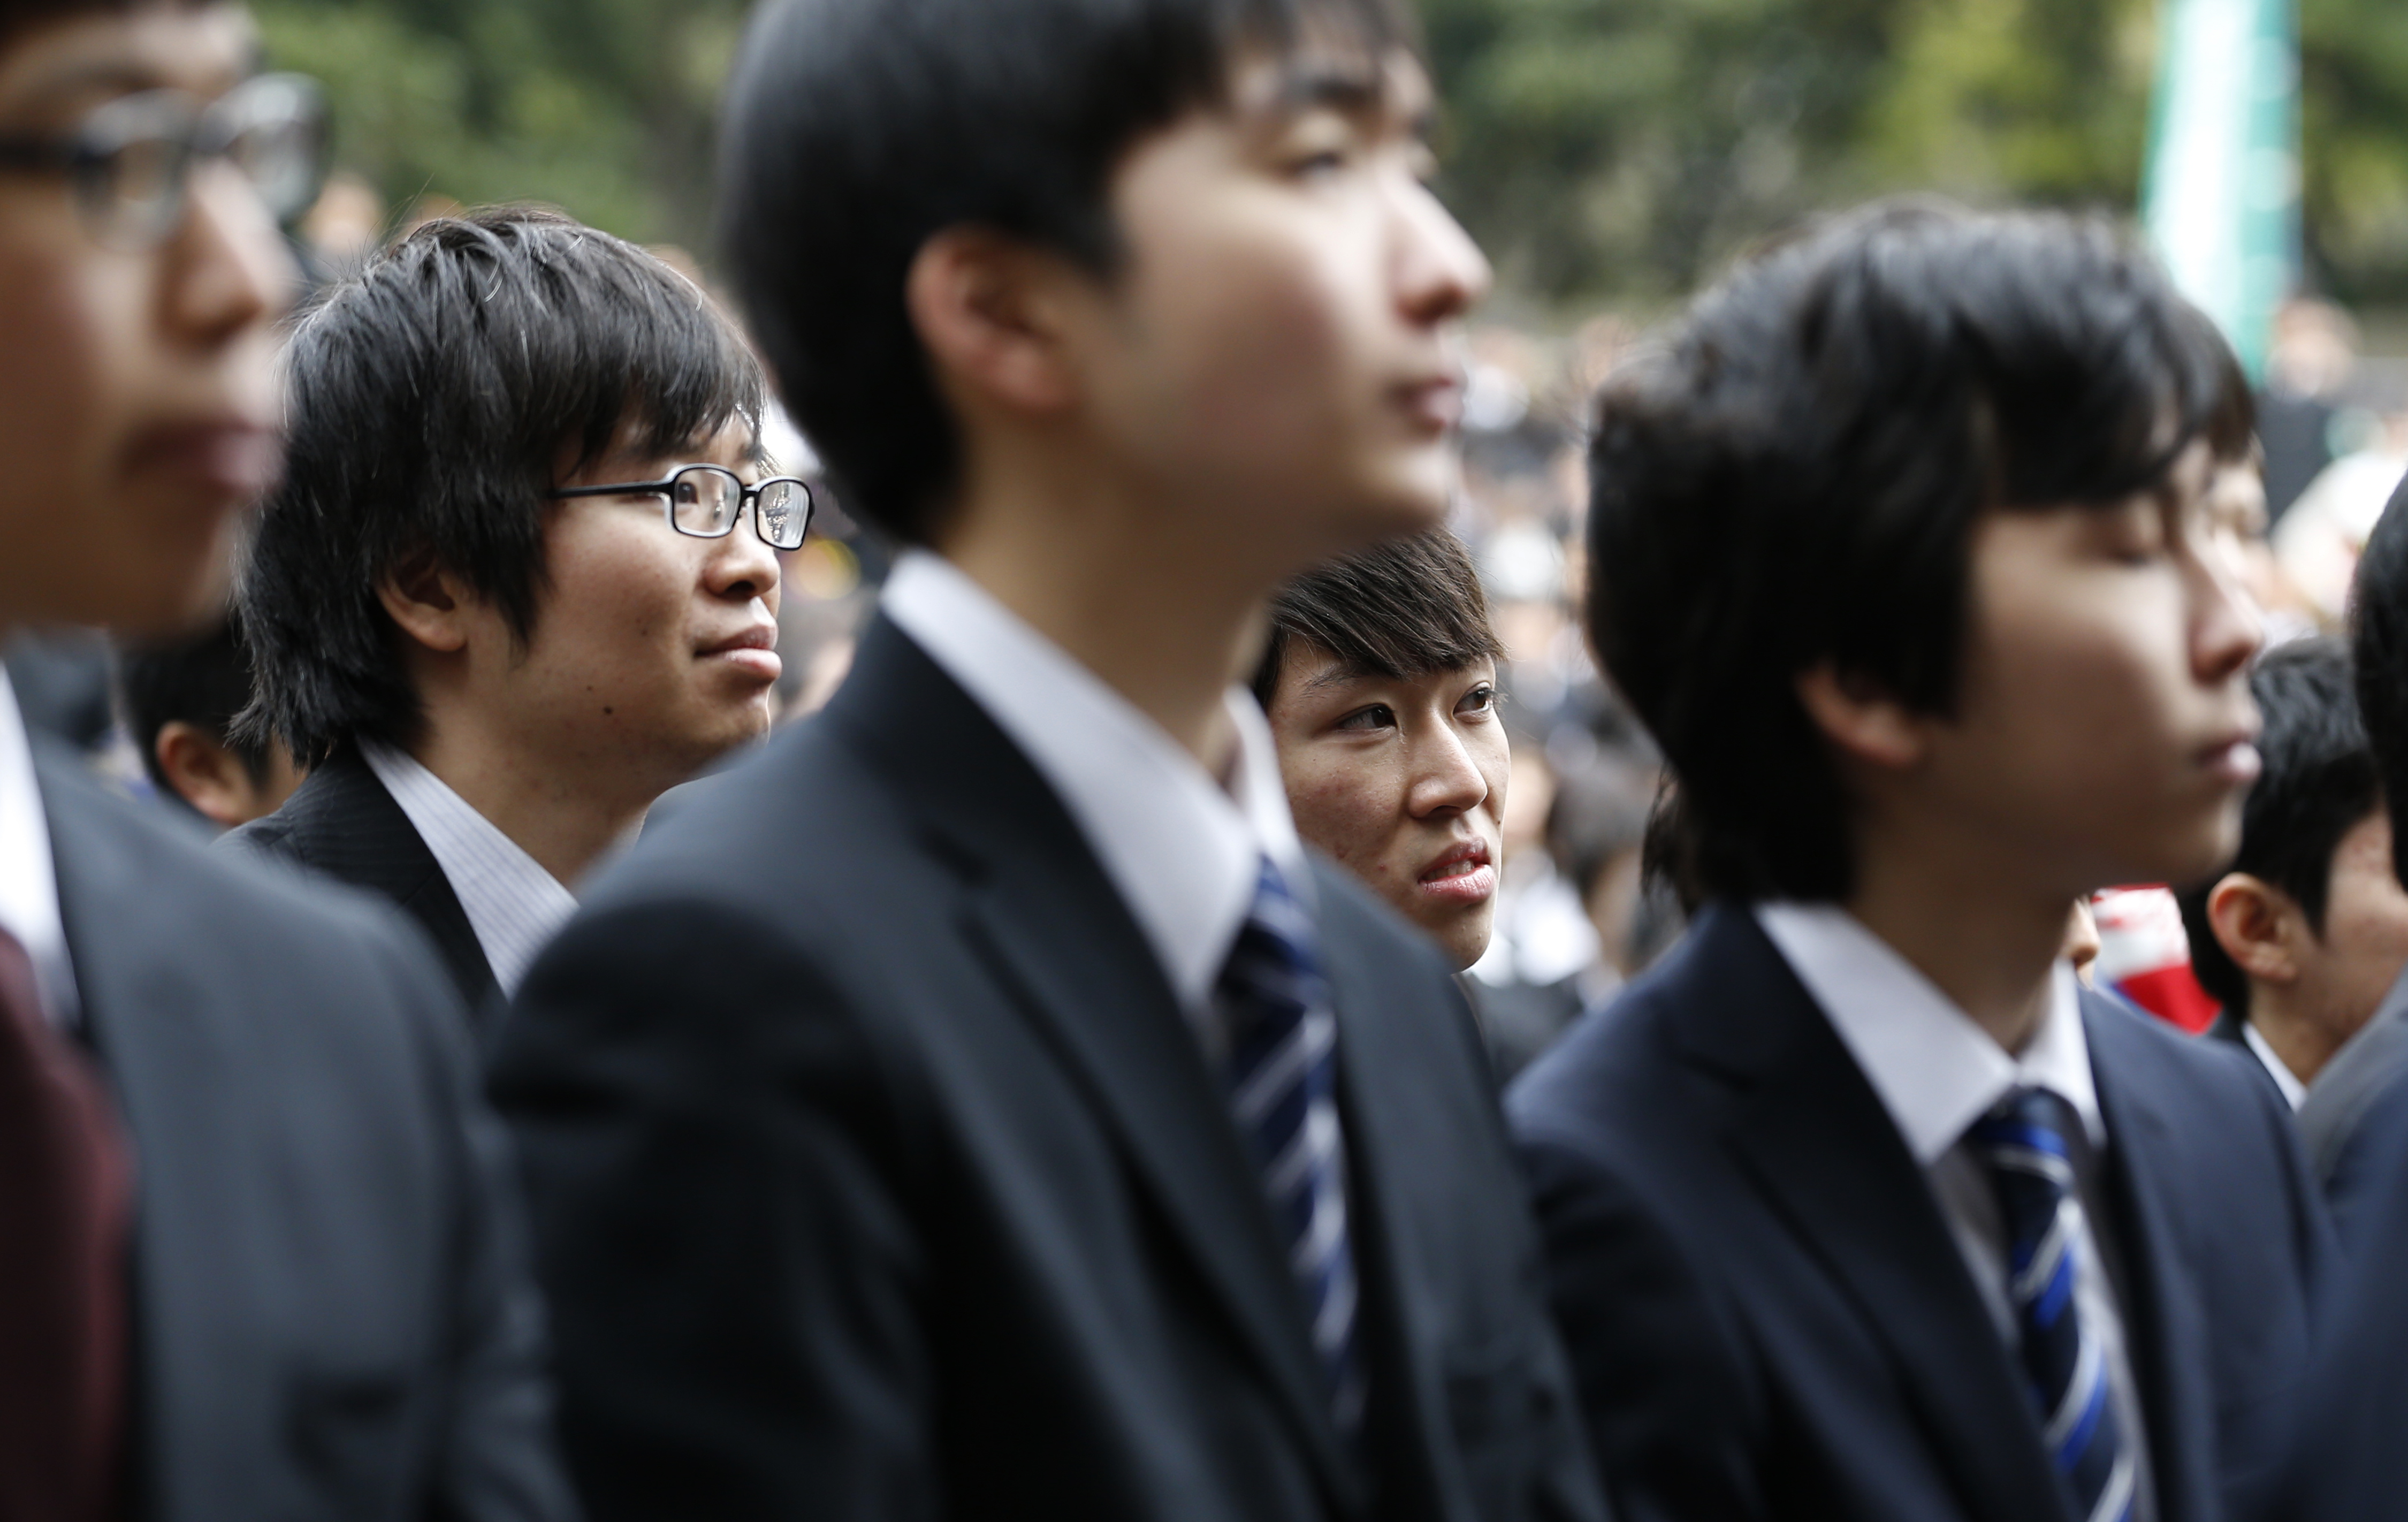 College students listen to a guest speaker during a ceremony to launch their job search at Tokyo's Hibiya Park on Wednesday. | AP